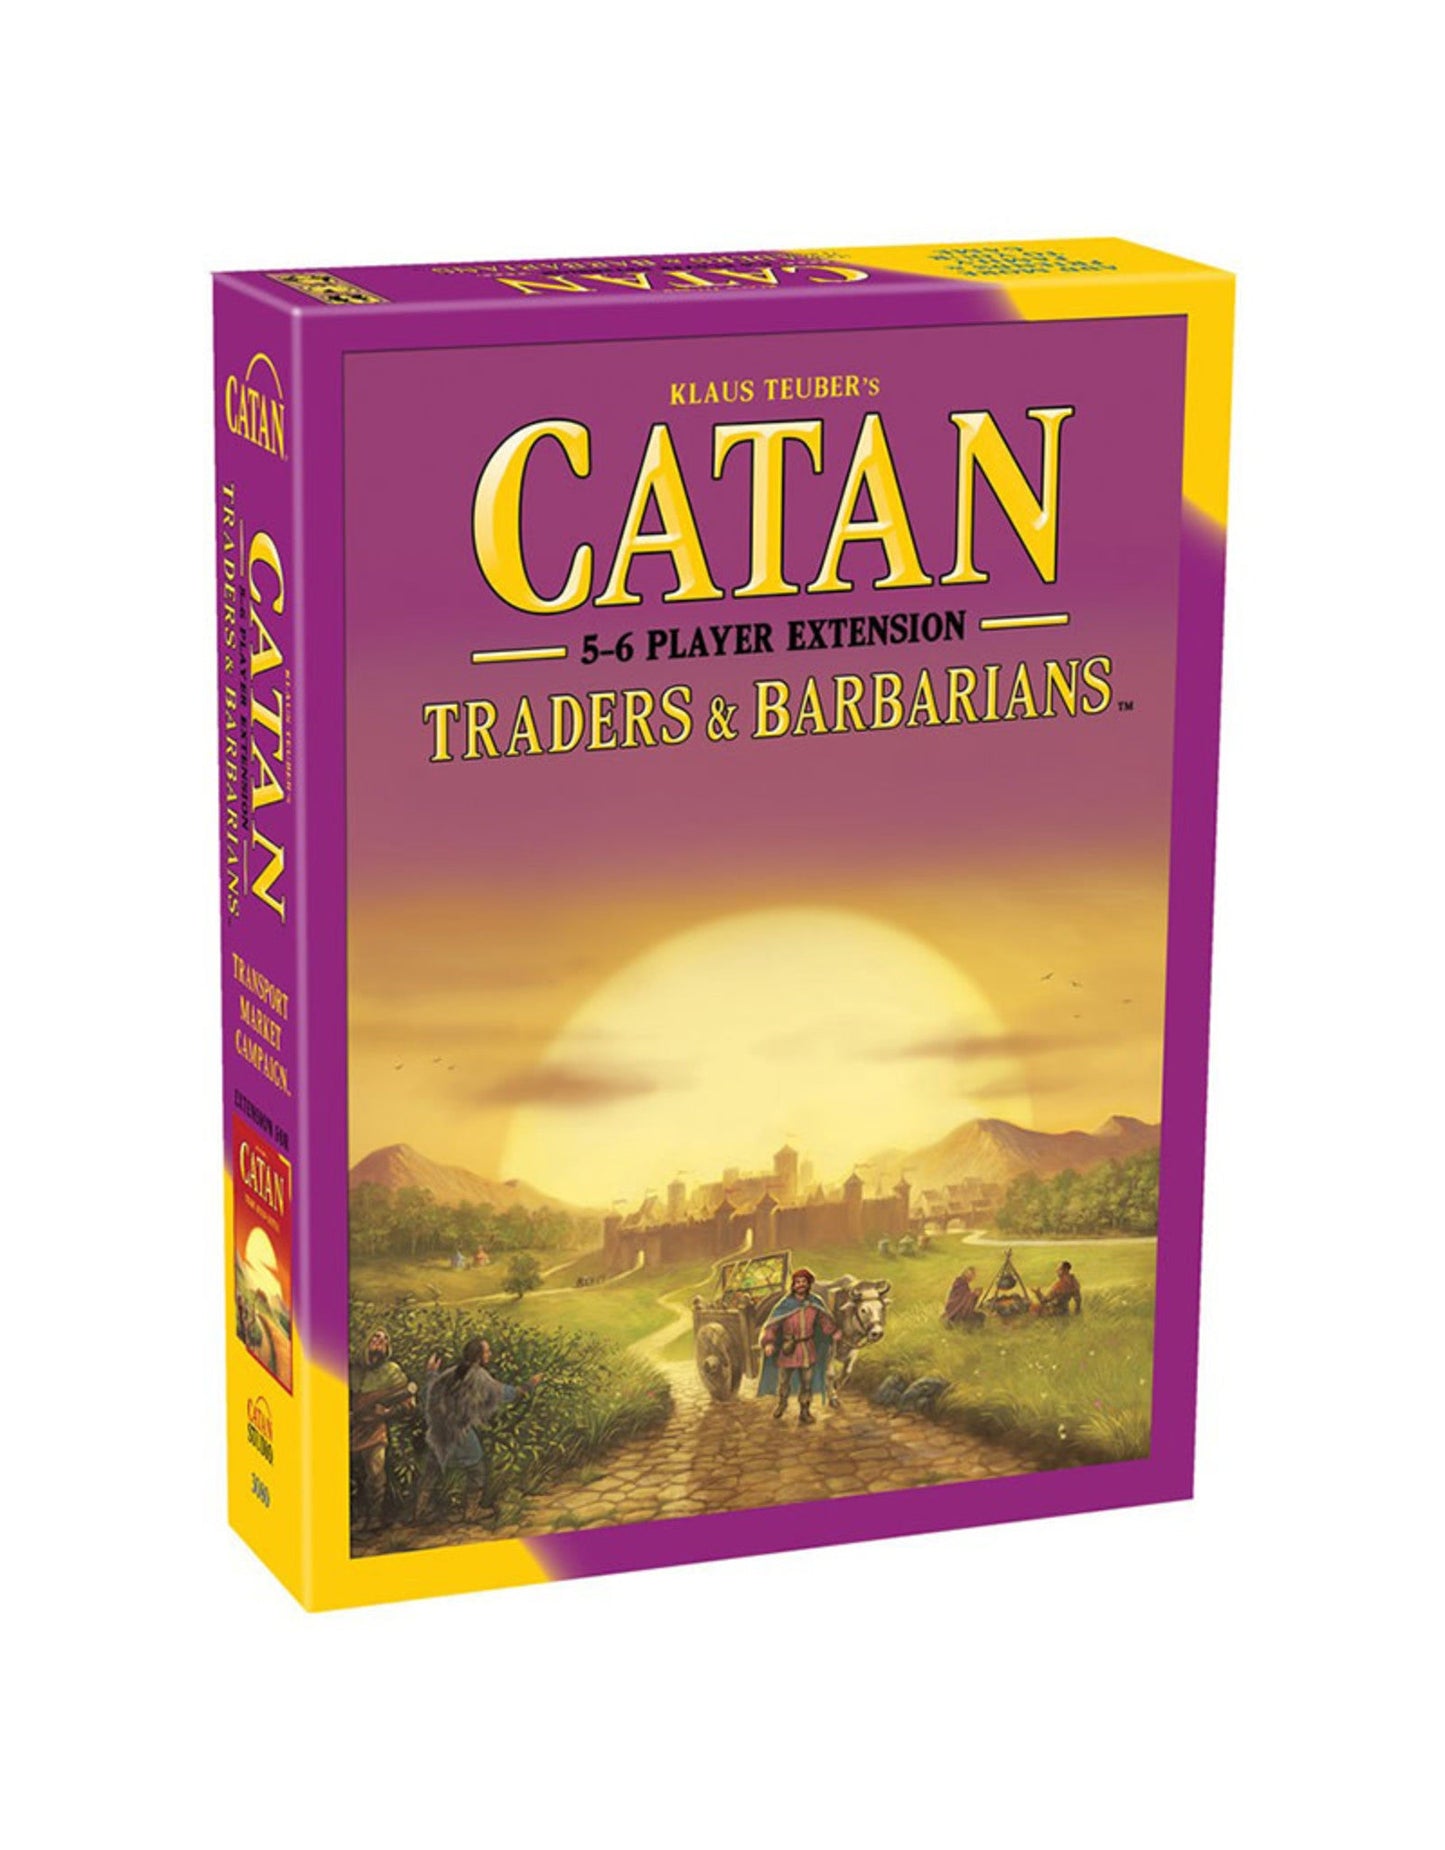 (BSG Certified USED) Catan - Traders & Barbarians 5-6 Player